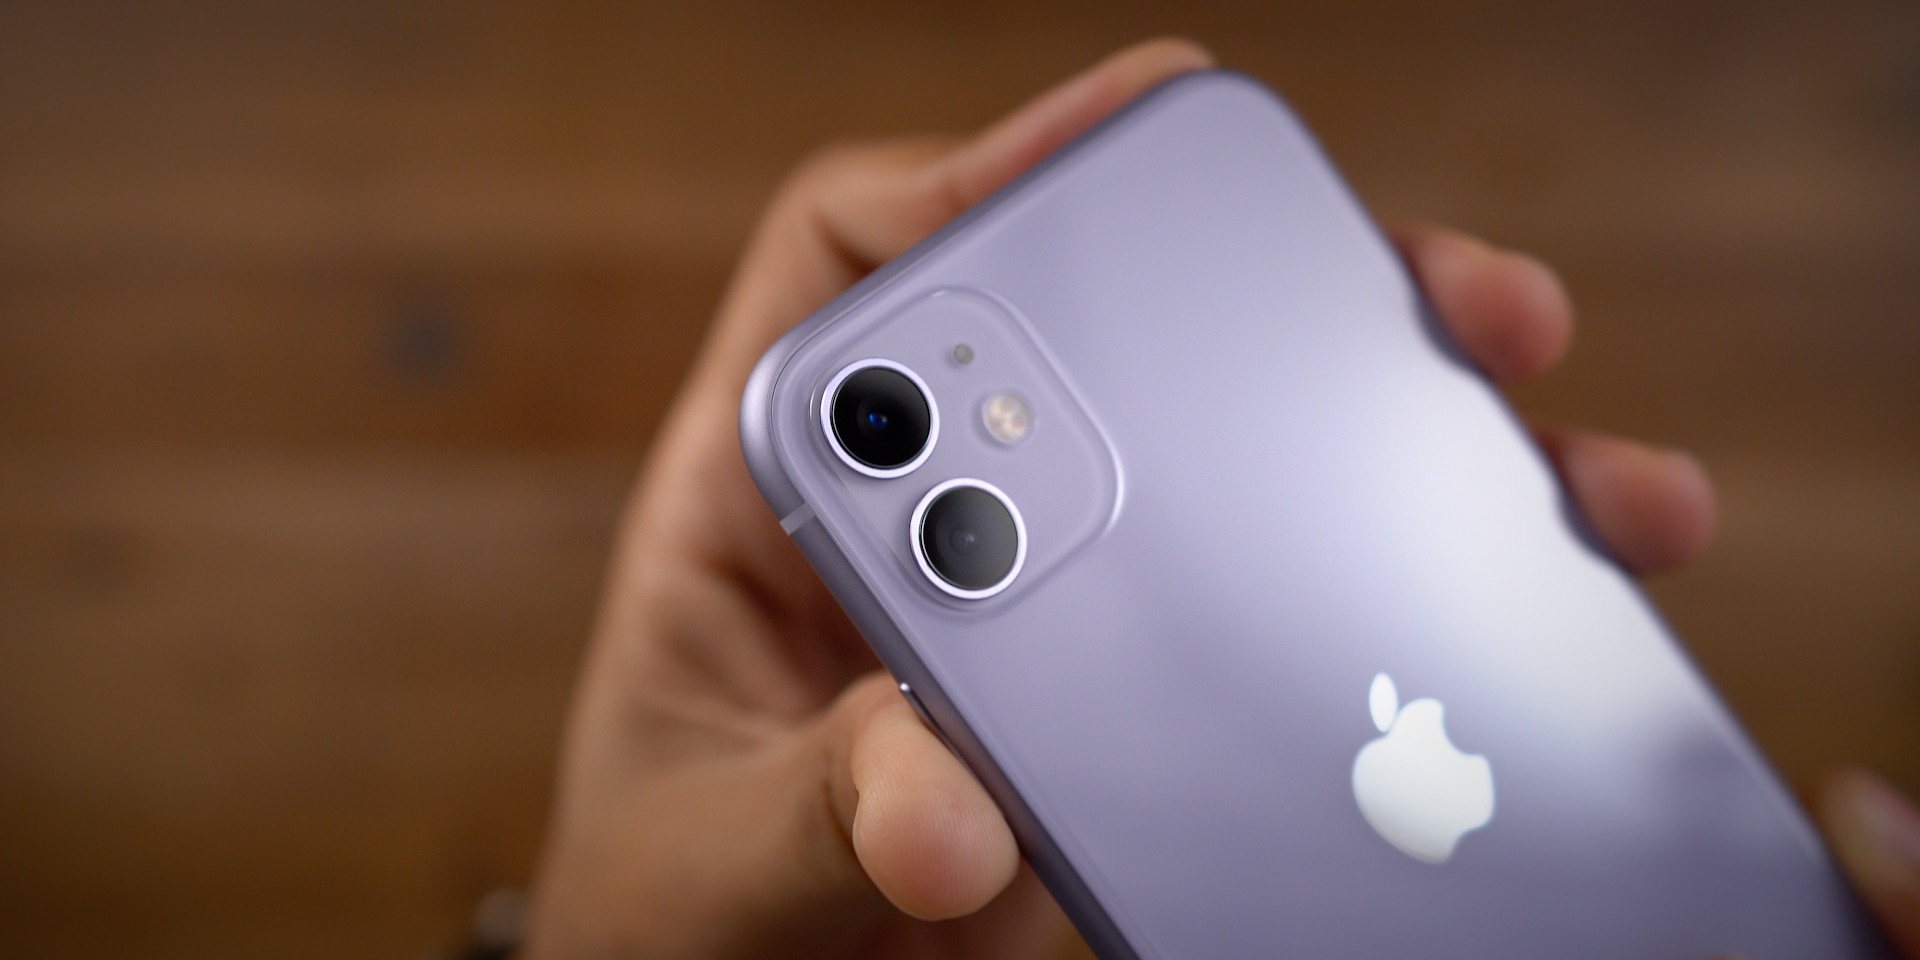 latest-ios-13-public-beta-brings-deep-fusion-camera-feature-to-iphone-11-lineup